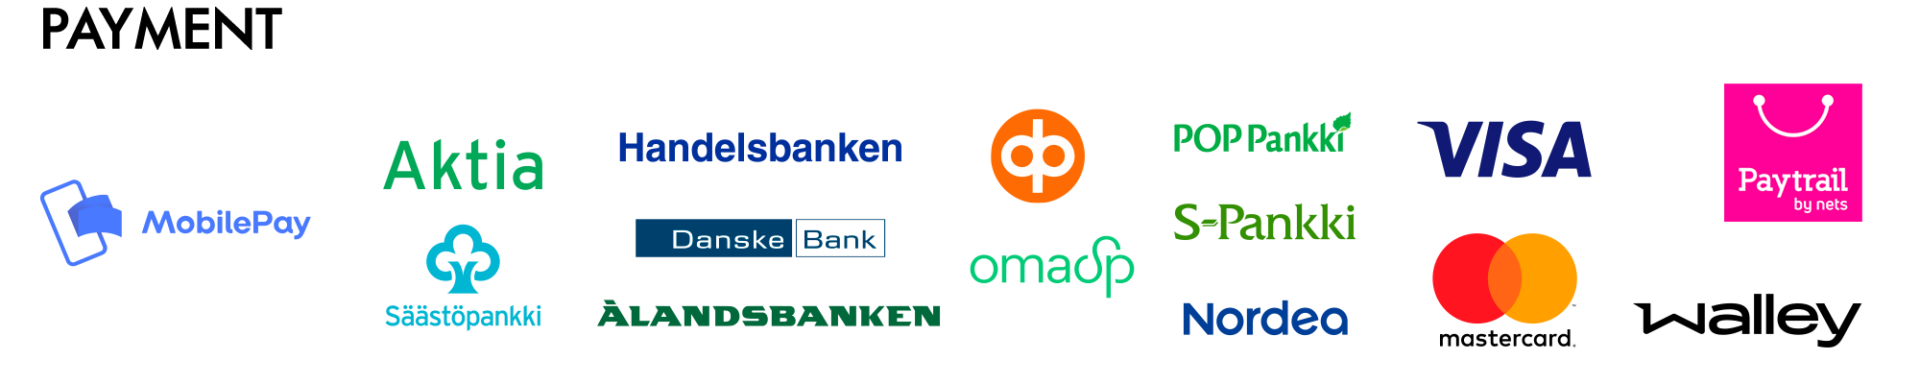 Payment options on Paytrail with Mobile pay, online banks, Visa, Mastercard and Walley